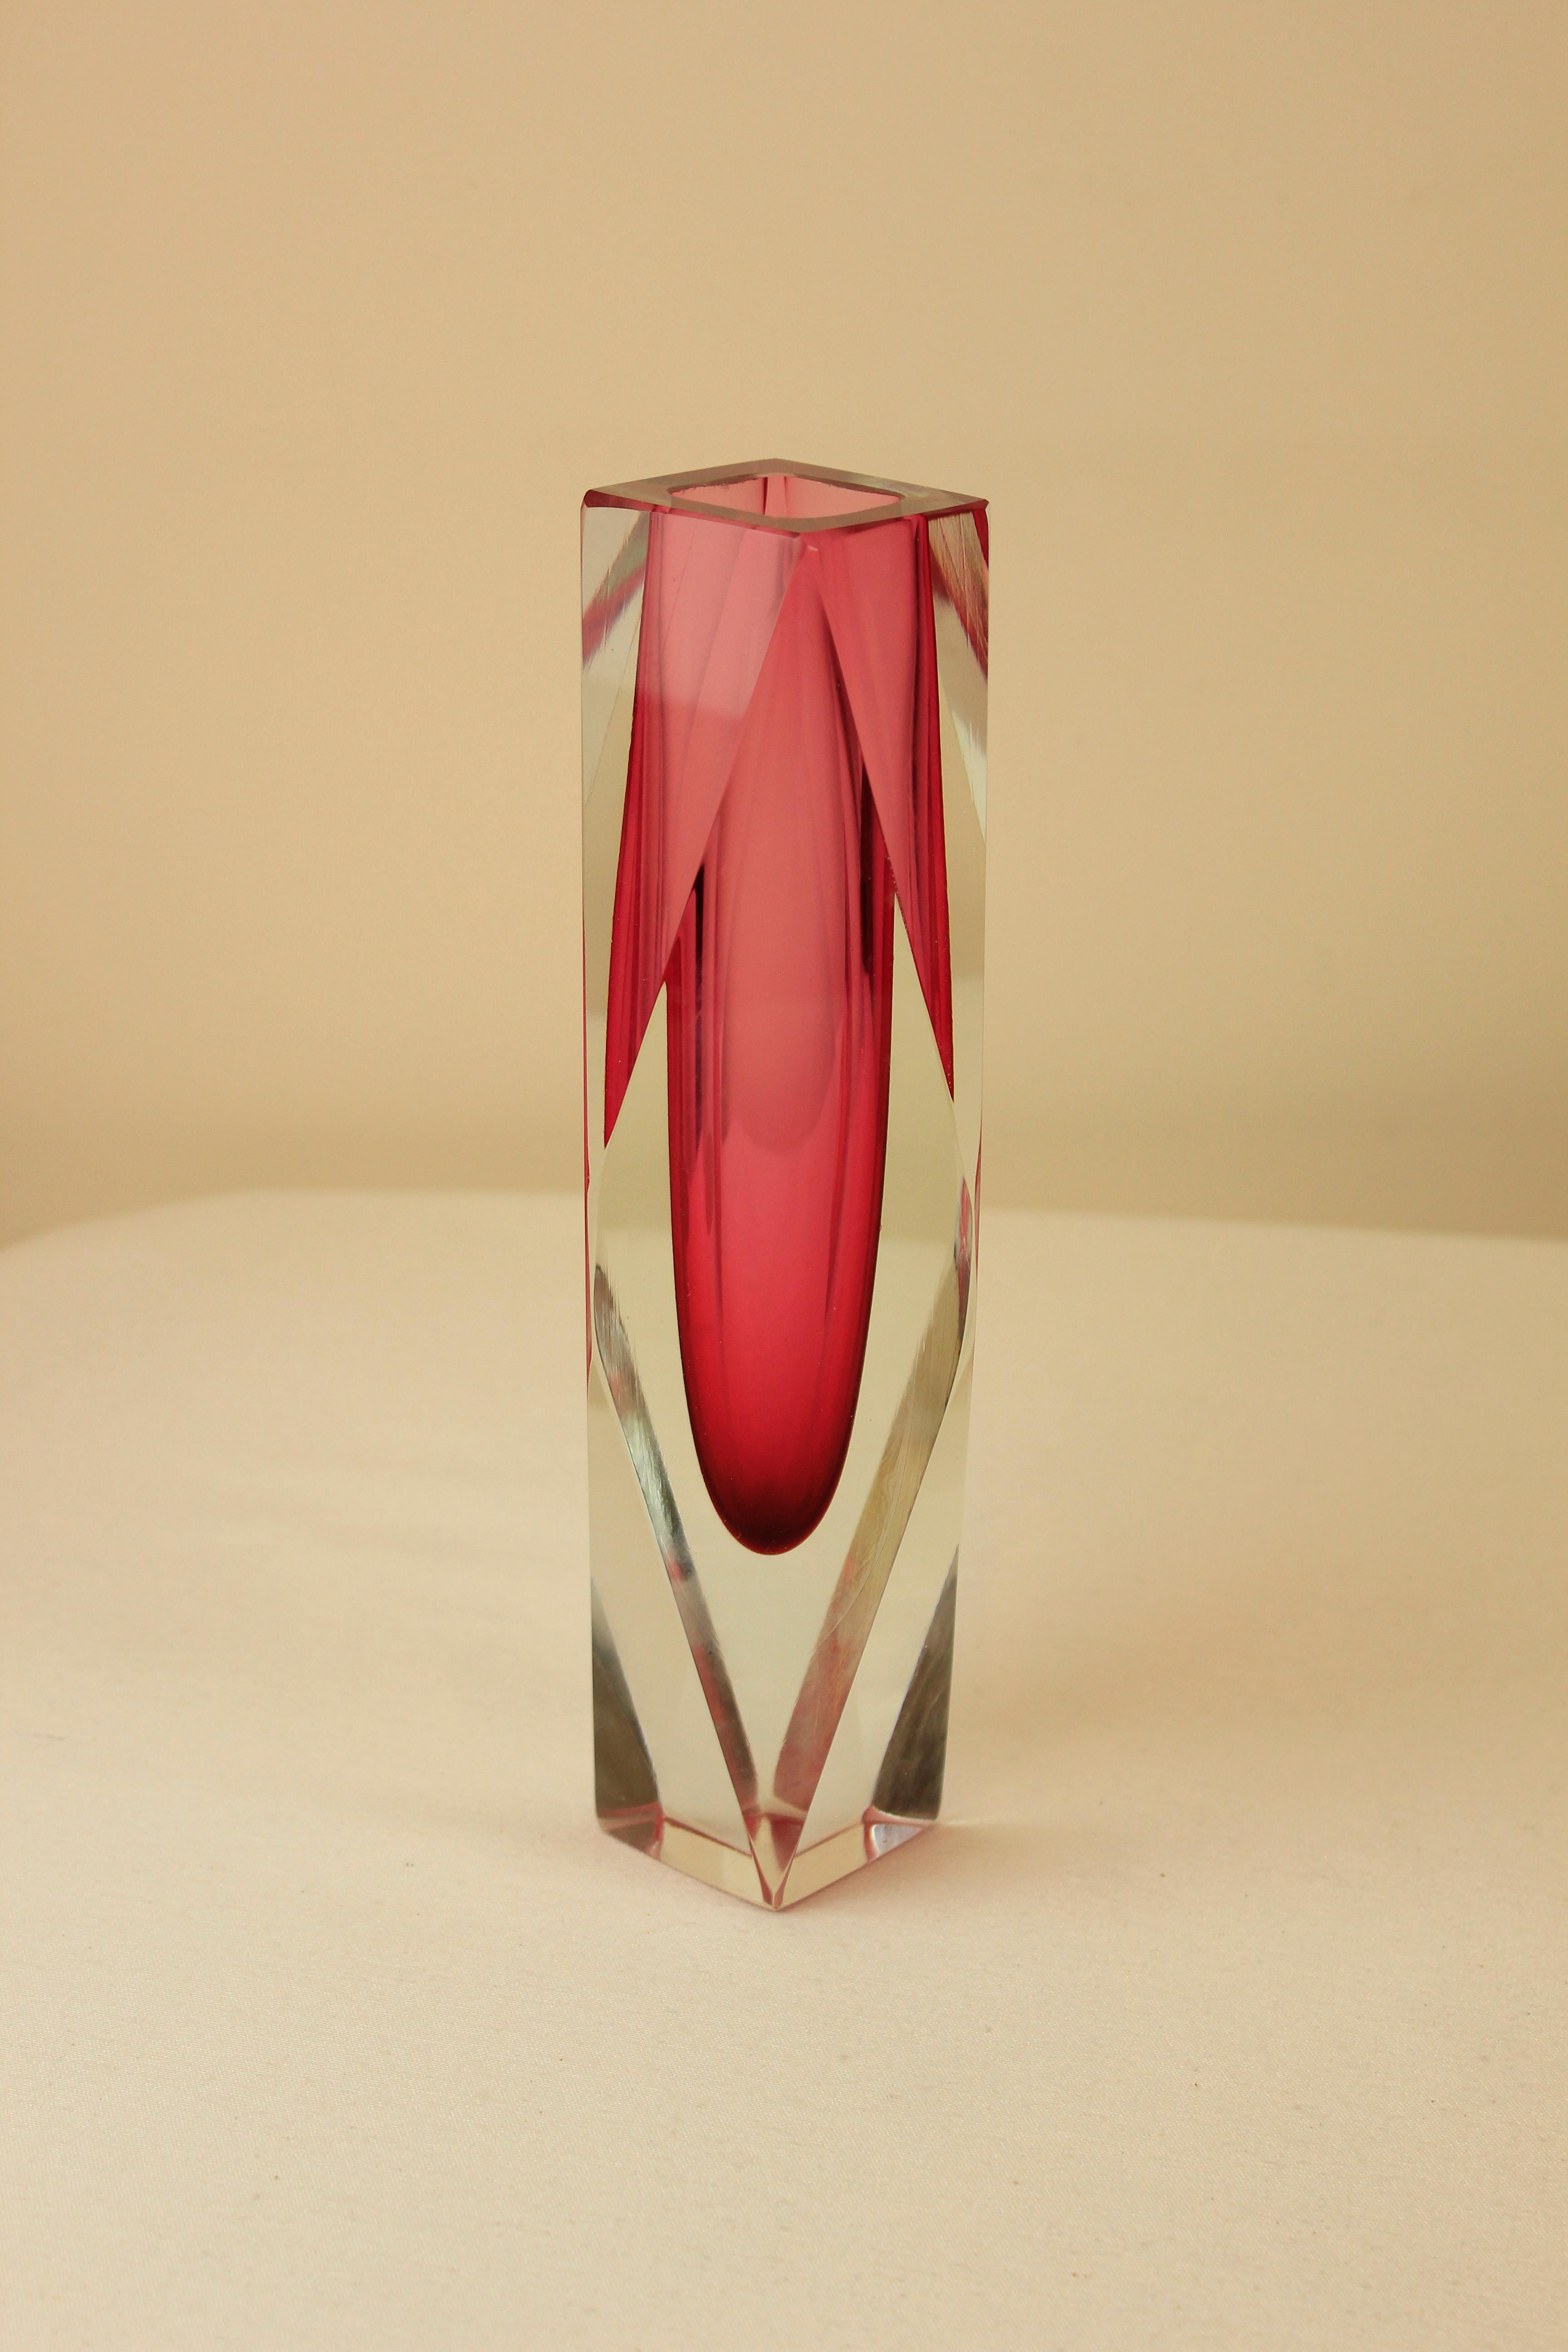 Mandruzzato Sommerso monumental vase in pink. Made in Italy by Alessandro Mandruzzato, 1960s.

Made from blown Murano glass, it features an intricate diamond-like geometric shape. It’s flat, raised facets produce a twinkling effect by reflecting